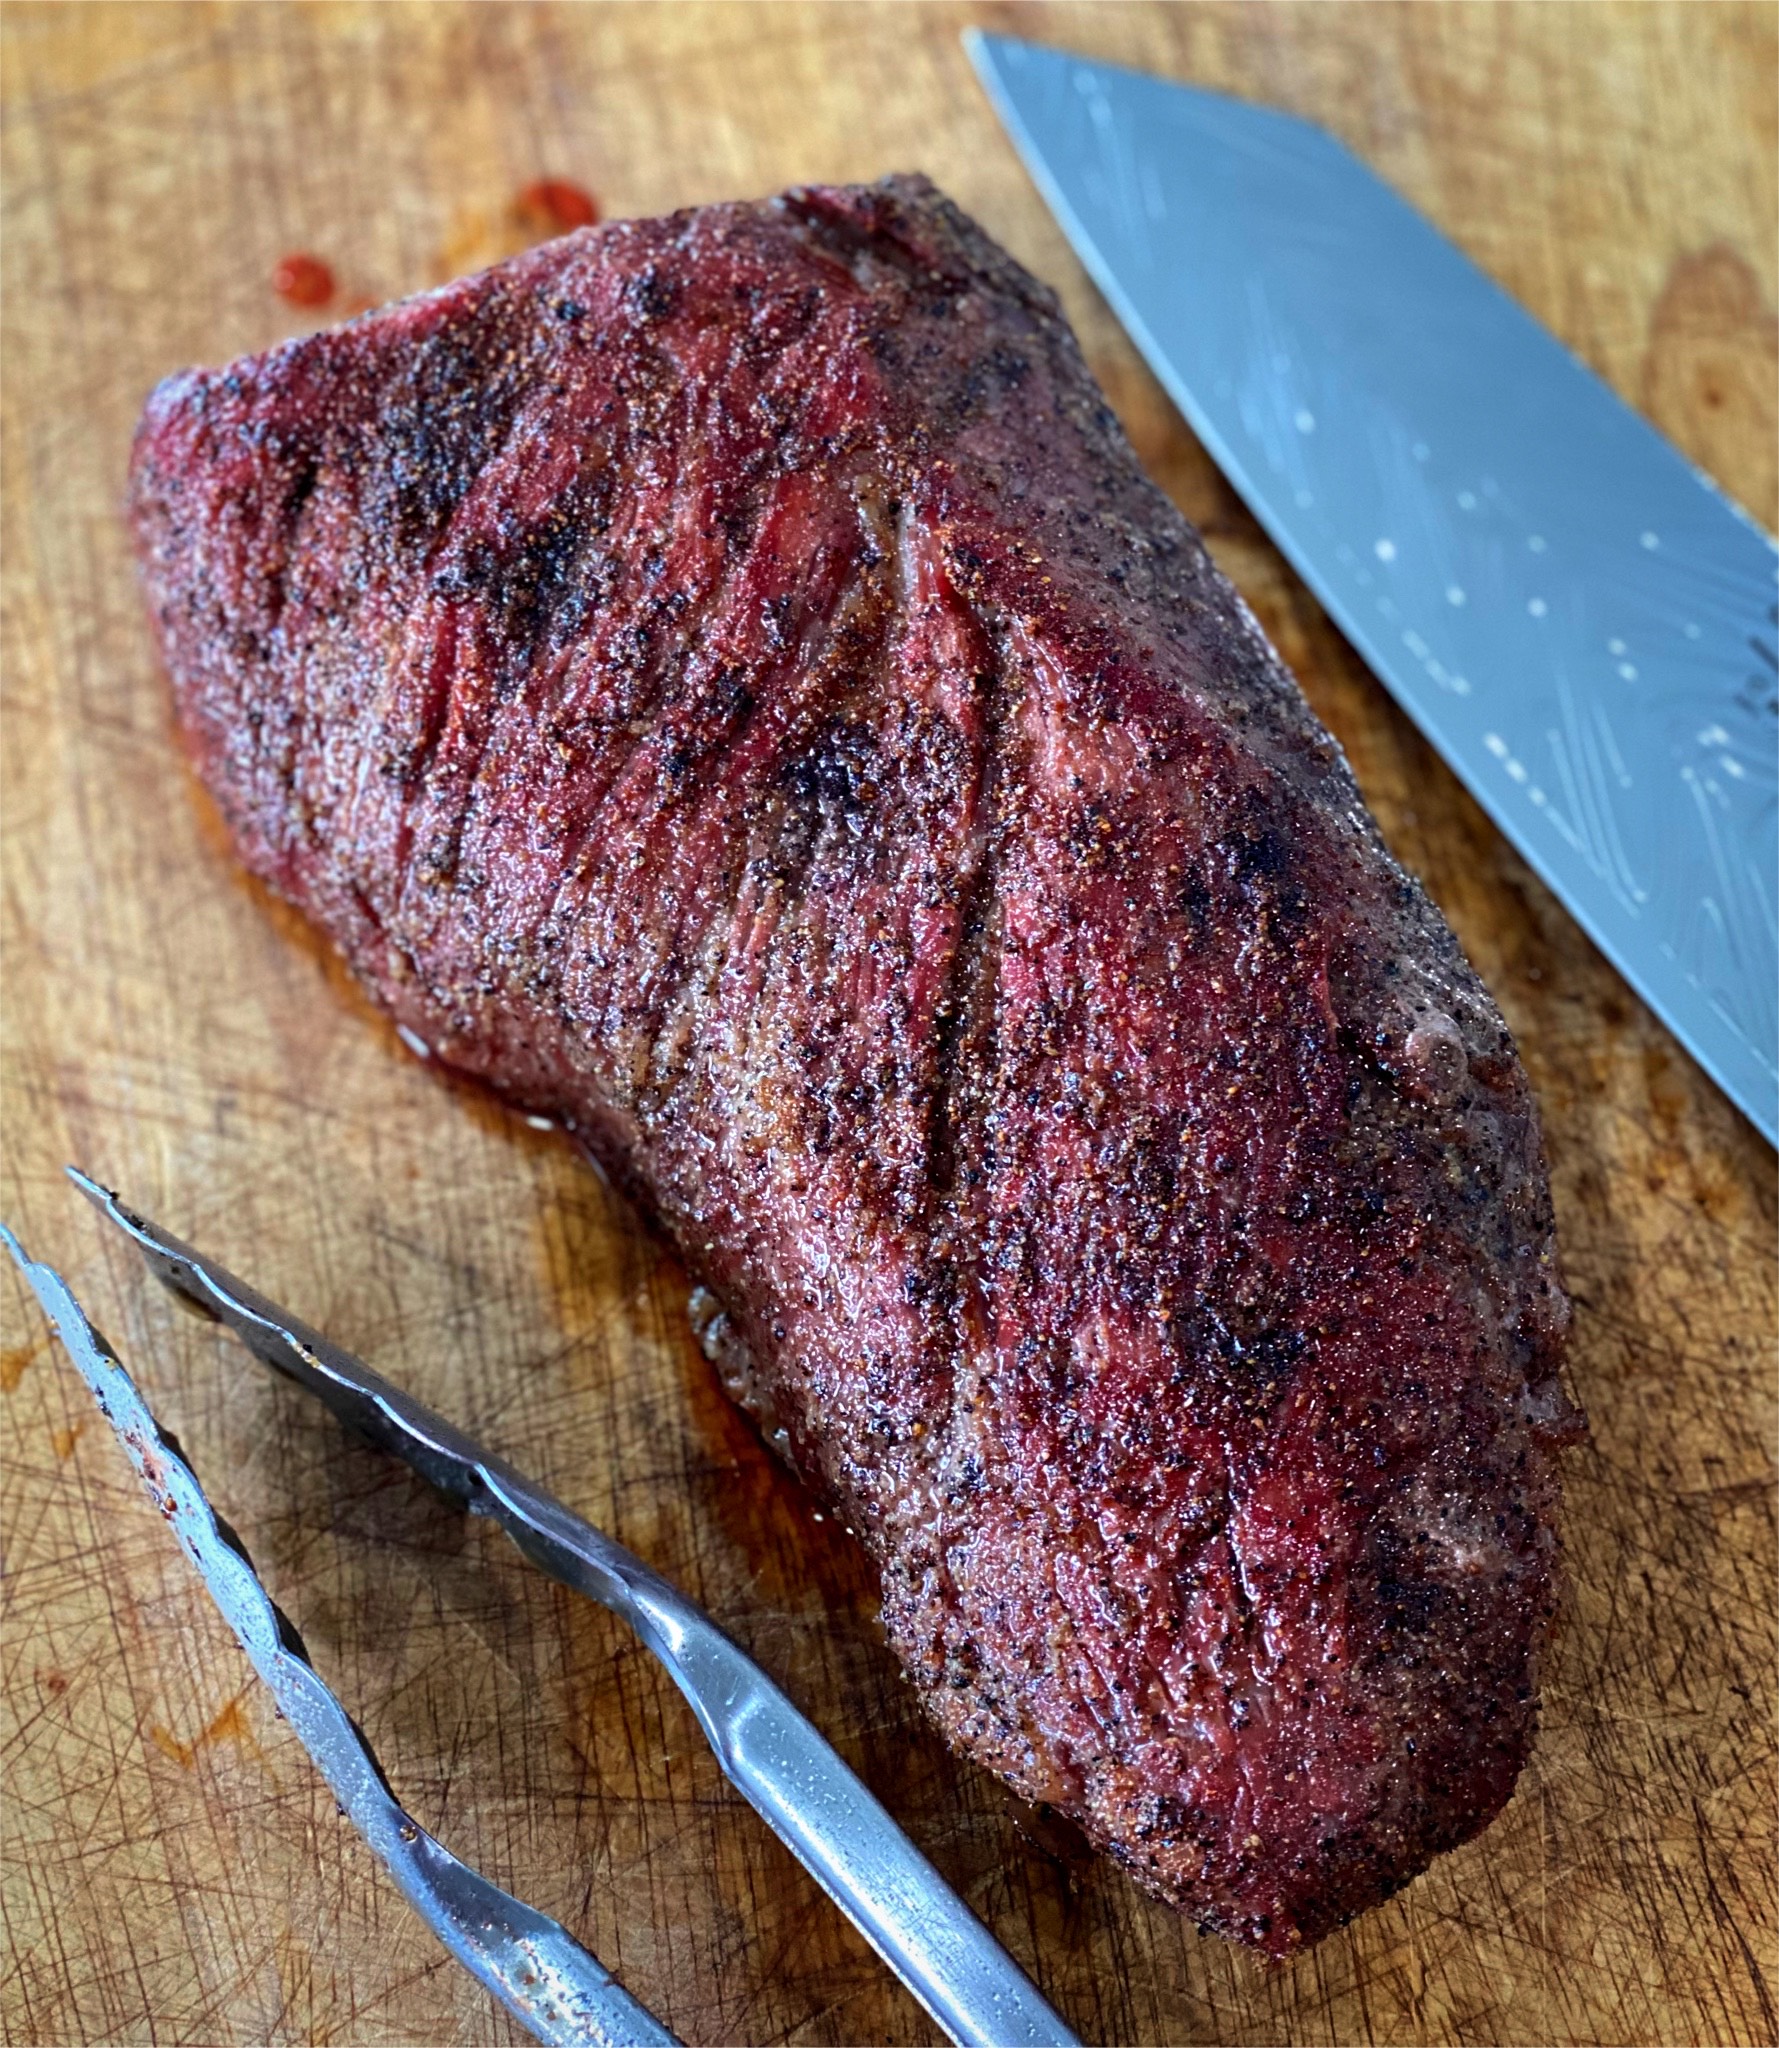 Smoked tri tip resting on the cutting board by a knife and tongs.